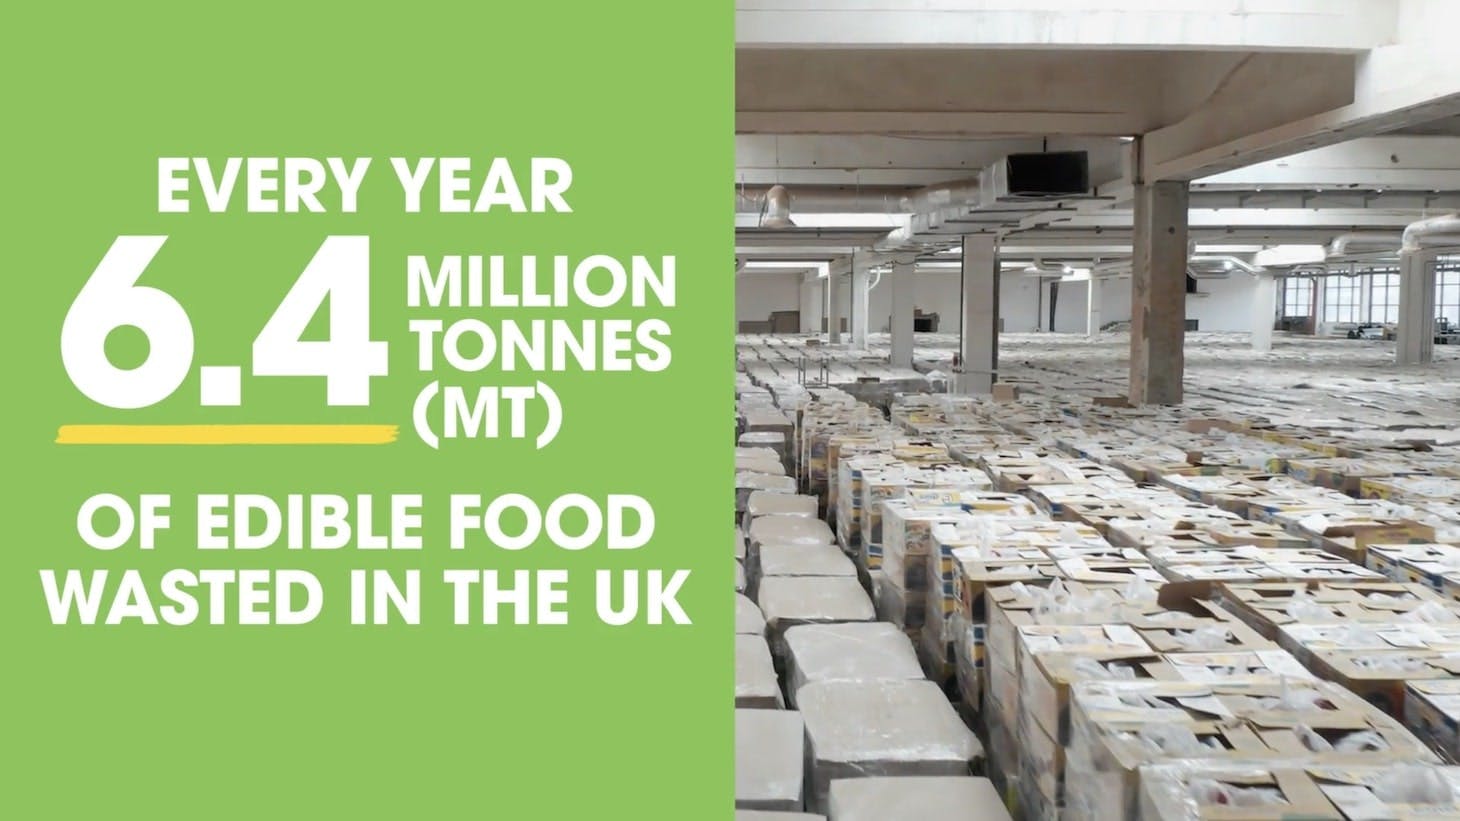 Video placeholder showing summary of video – Every year 6.4 million tonnes of edible food wasted in the UK